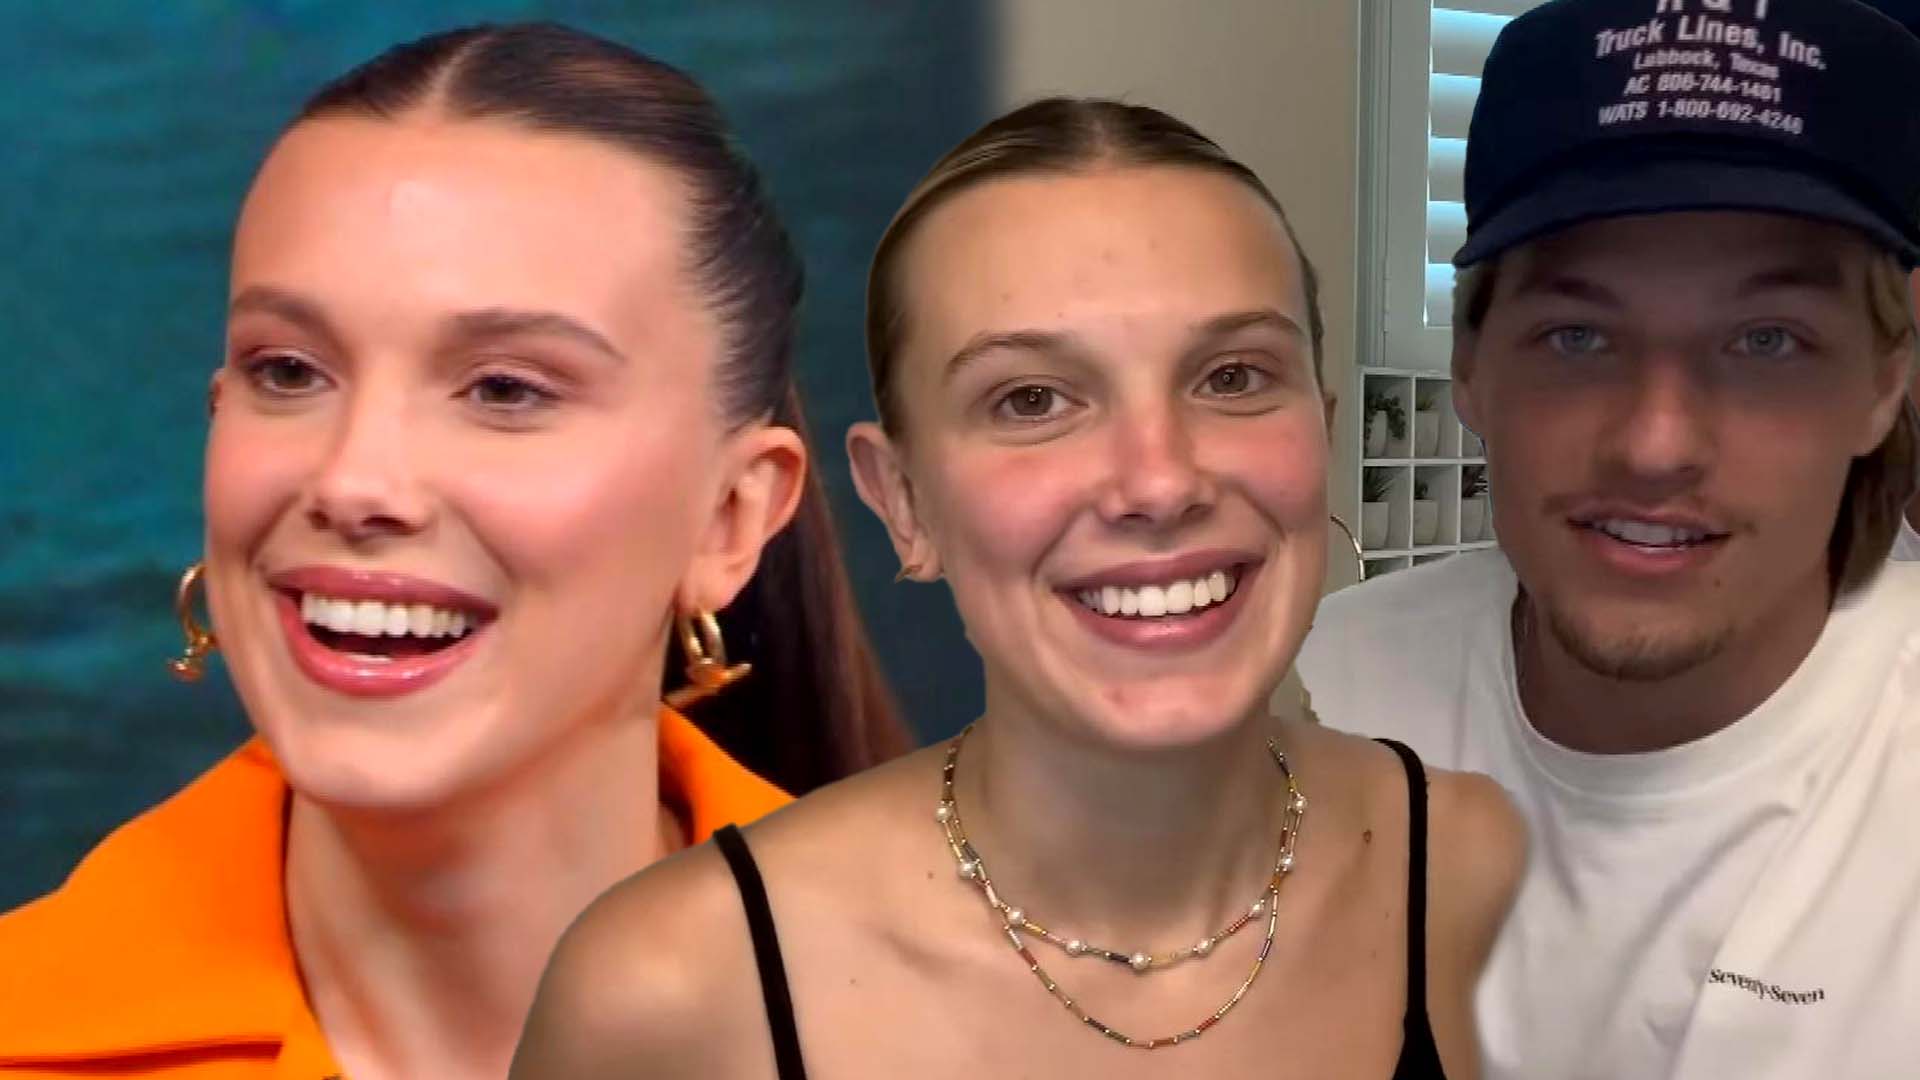 Millie Bobby Brown opens up about being groomed at 16 years old